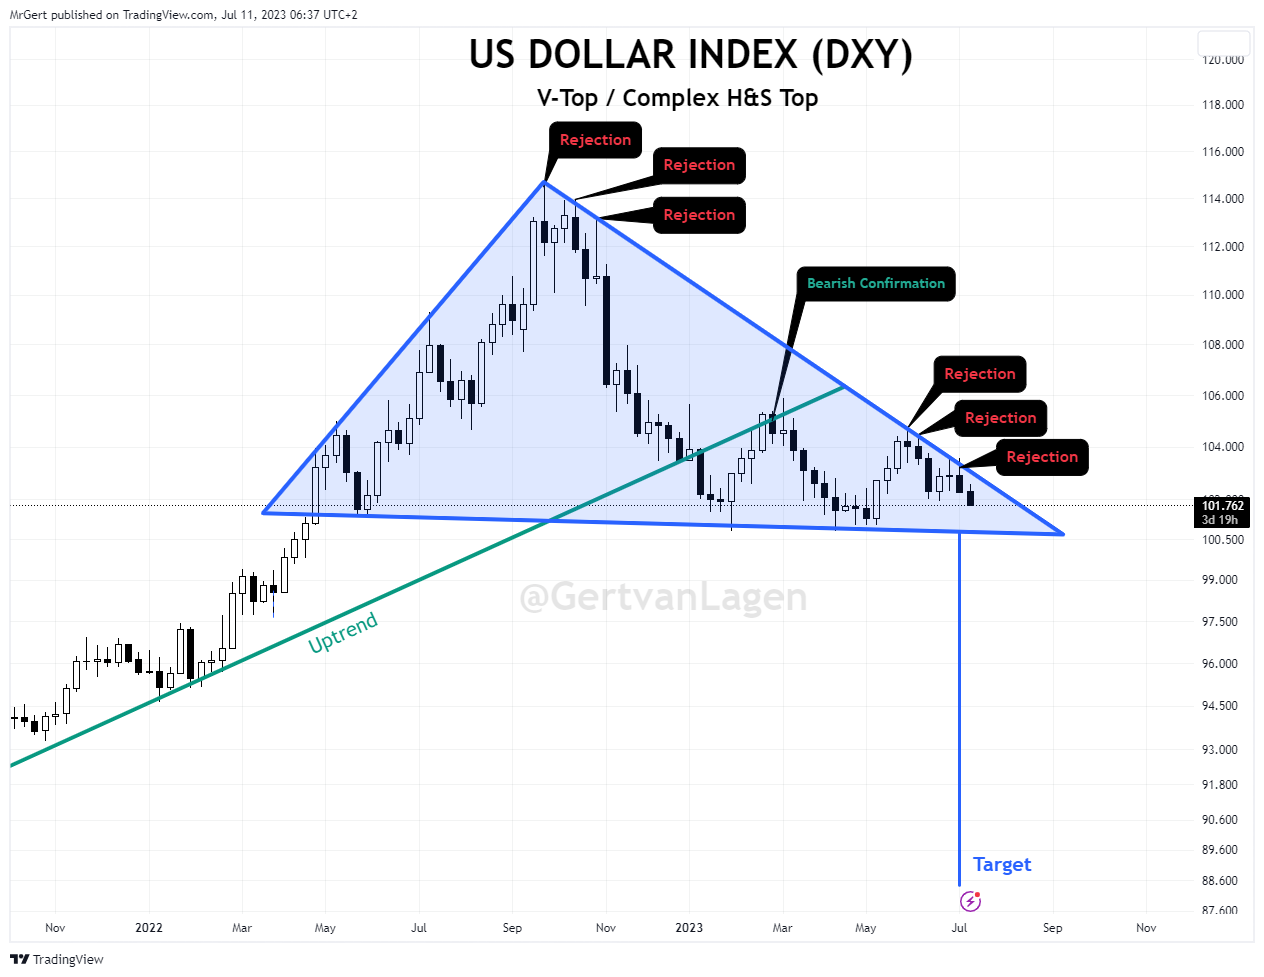 Bitcoin And Crypto Investors Must Monitor The DXY: 6x Rally Ahead?